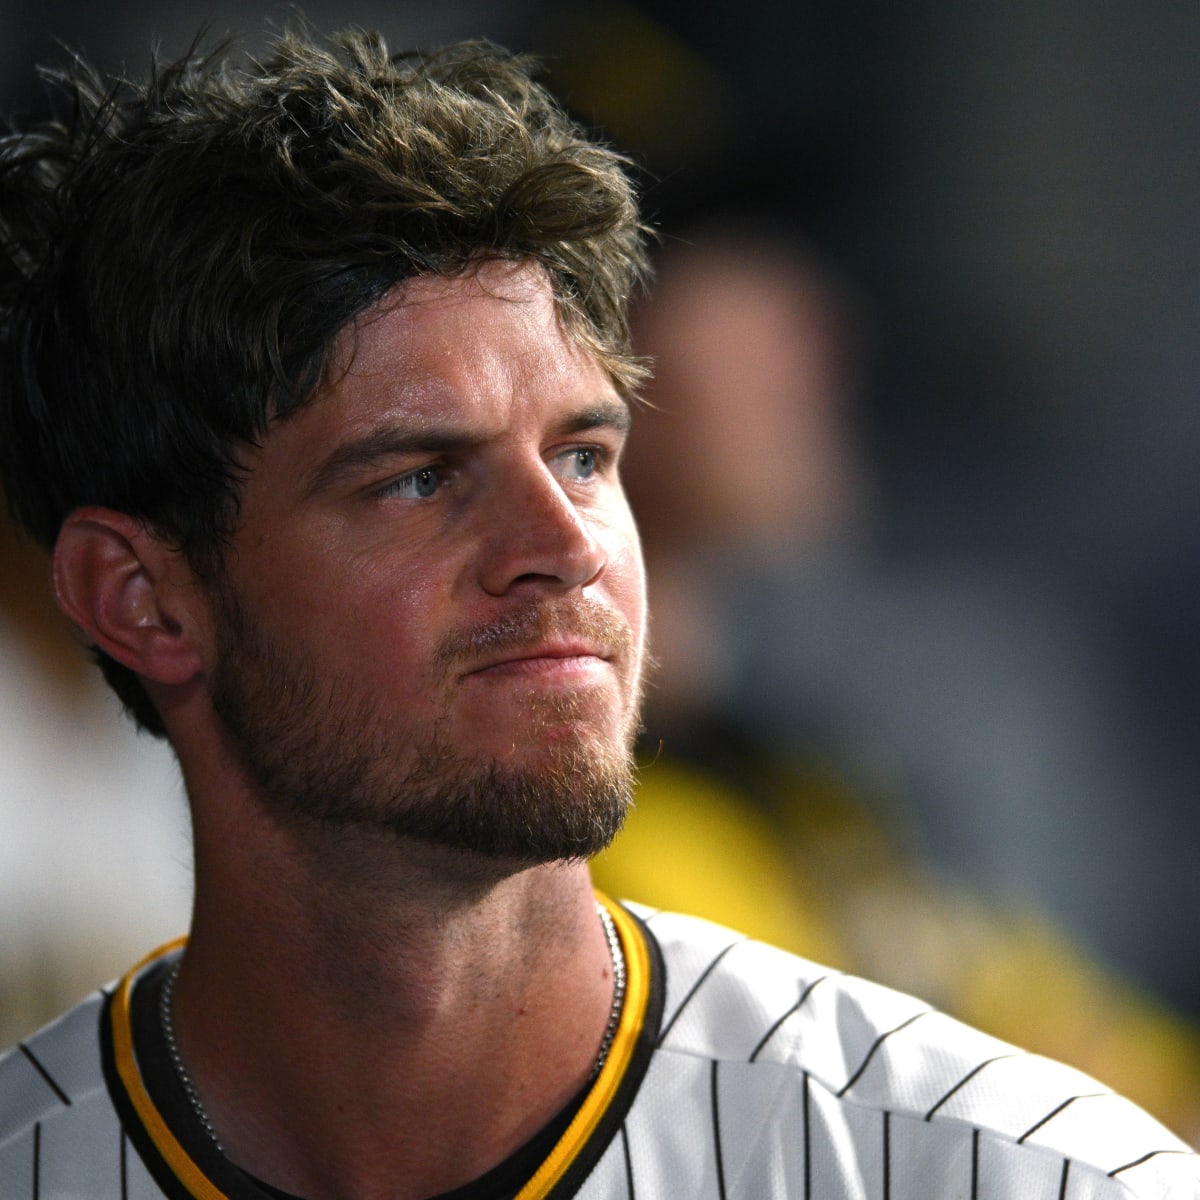 San Diego Padres News: Wil Myers' stats nothing to look into